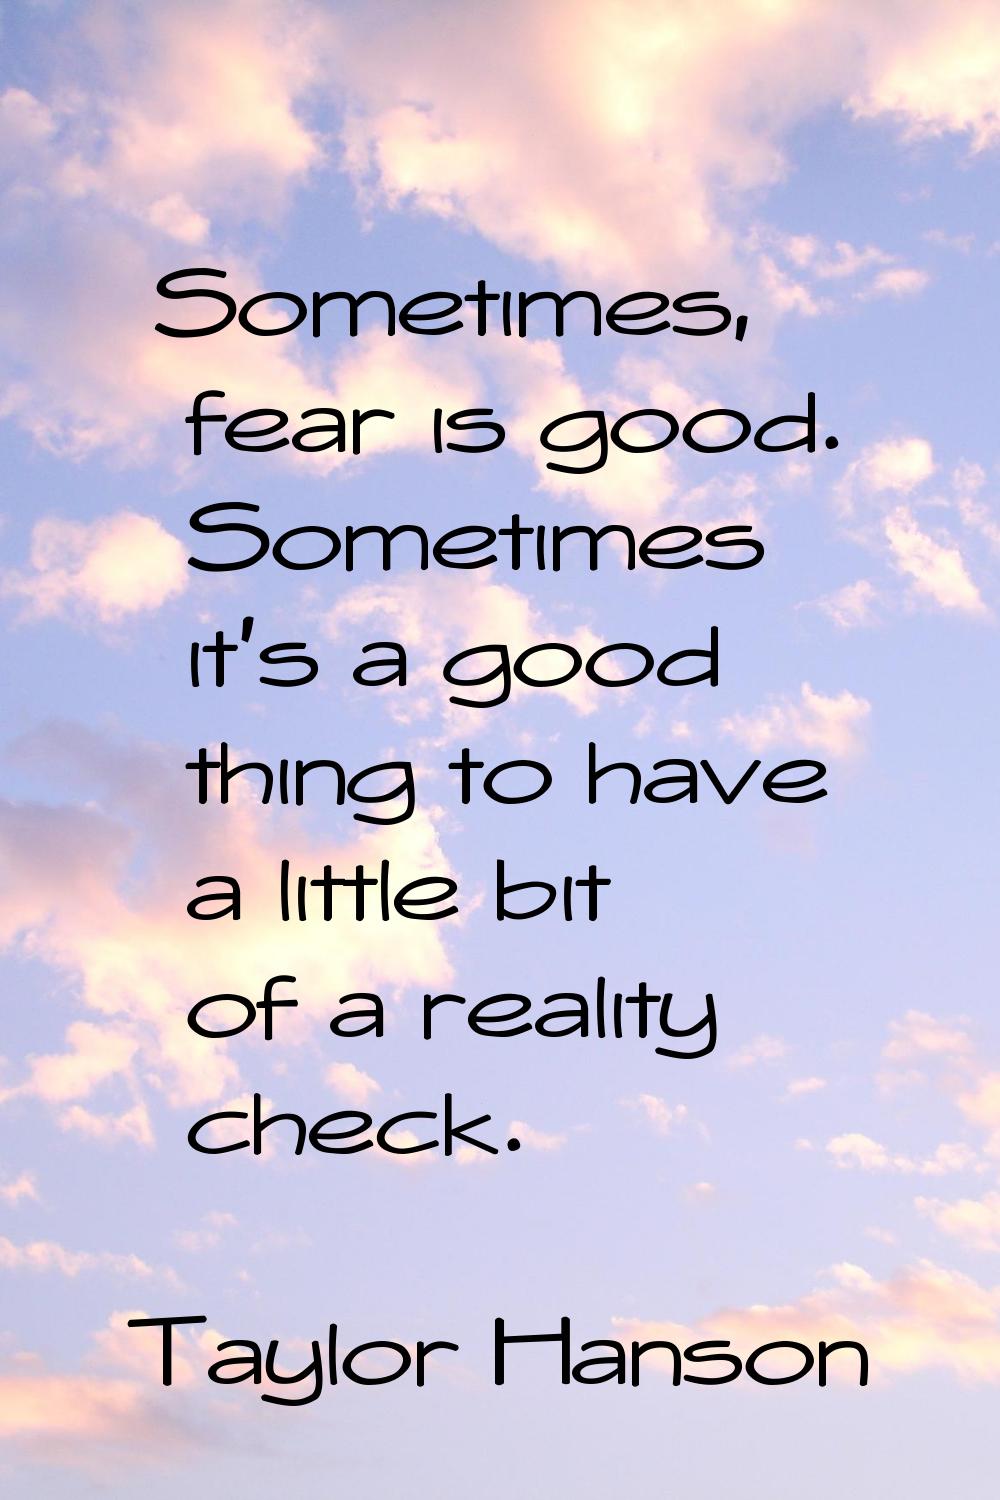 Sometimes, fear is good. Sometimes it's a good thing to have a little bit of a reality check.